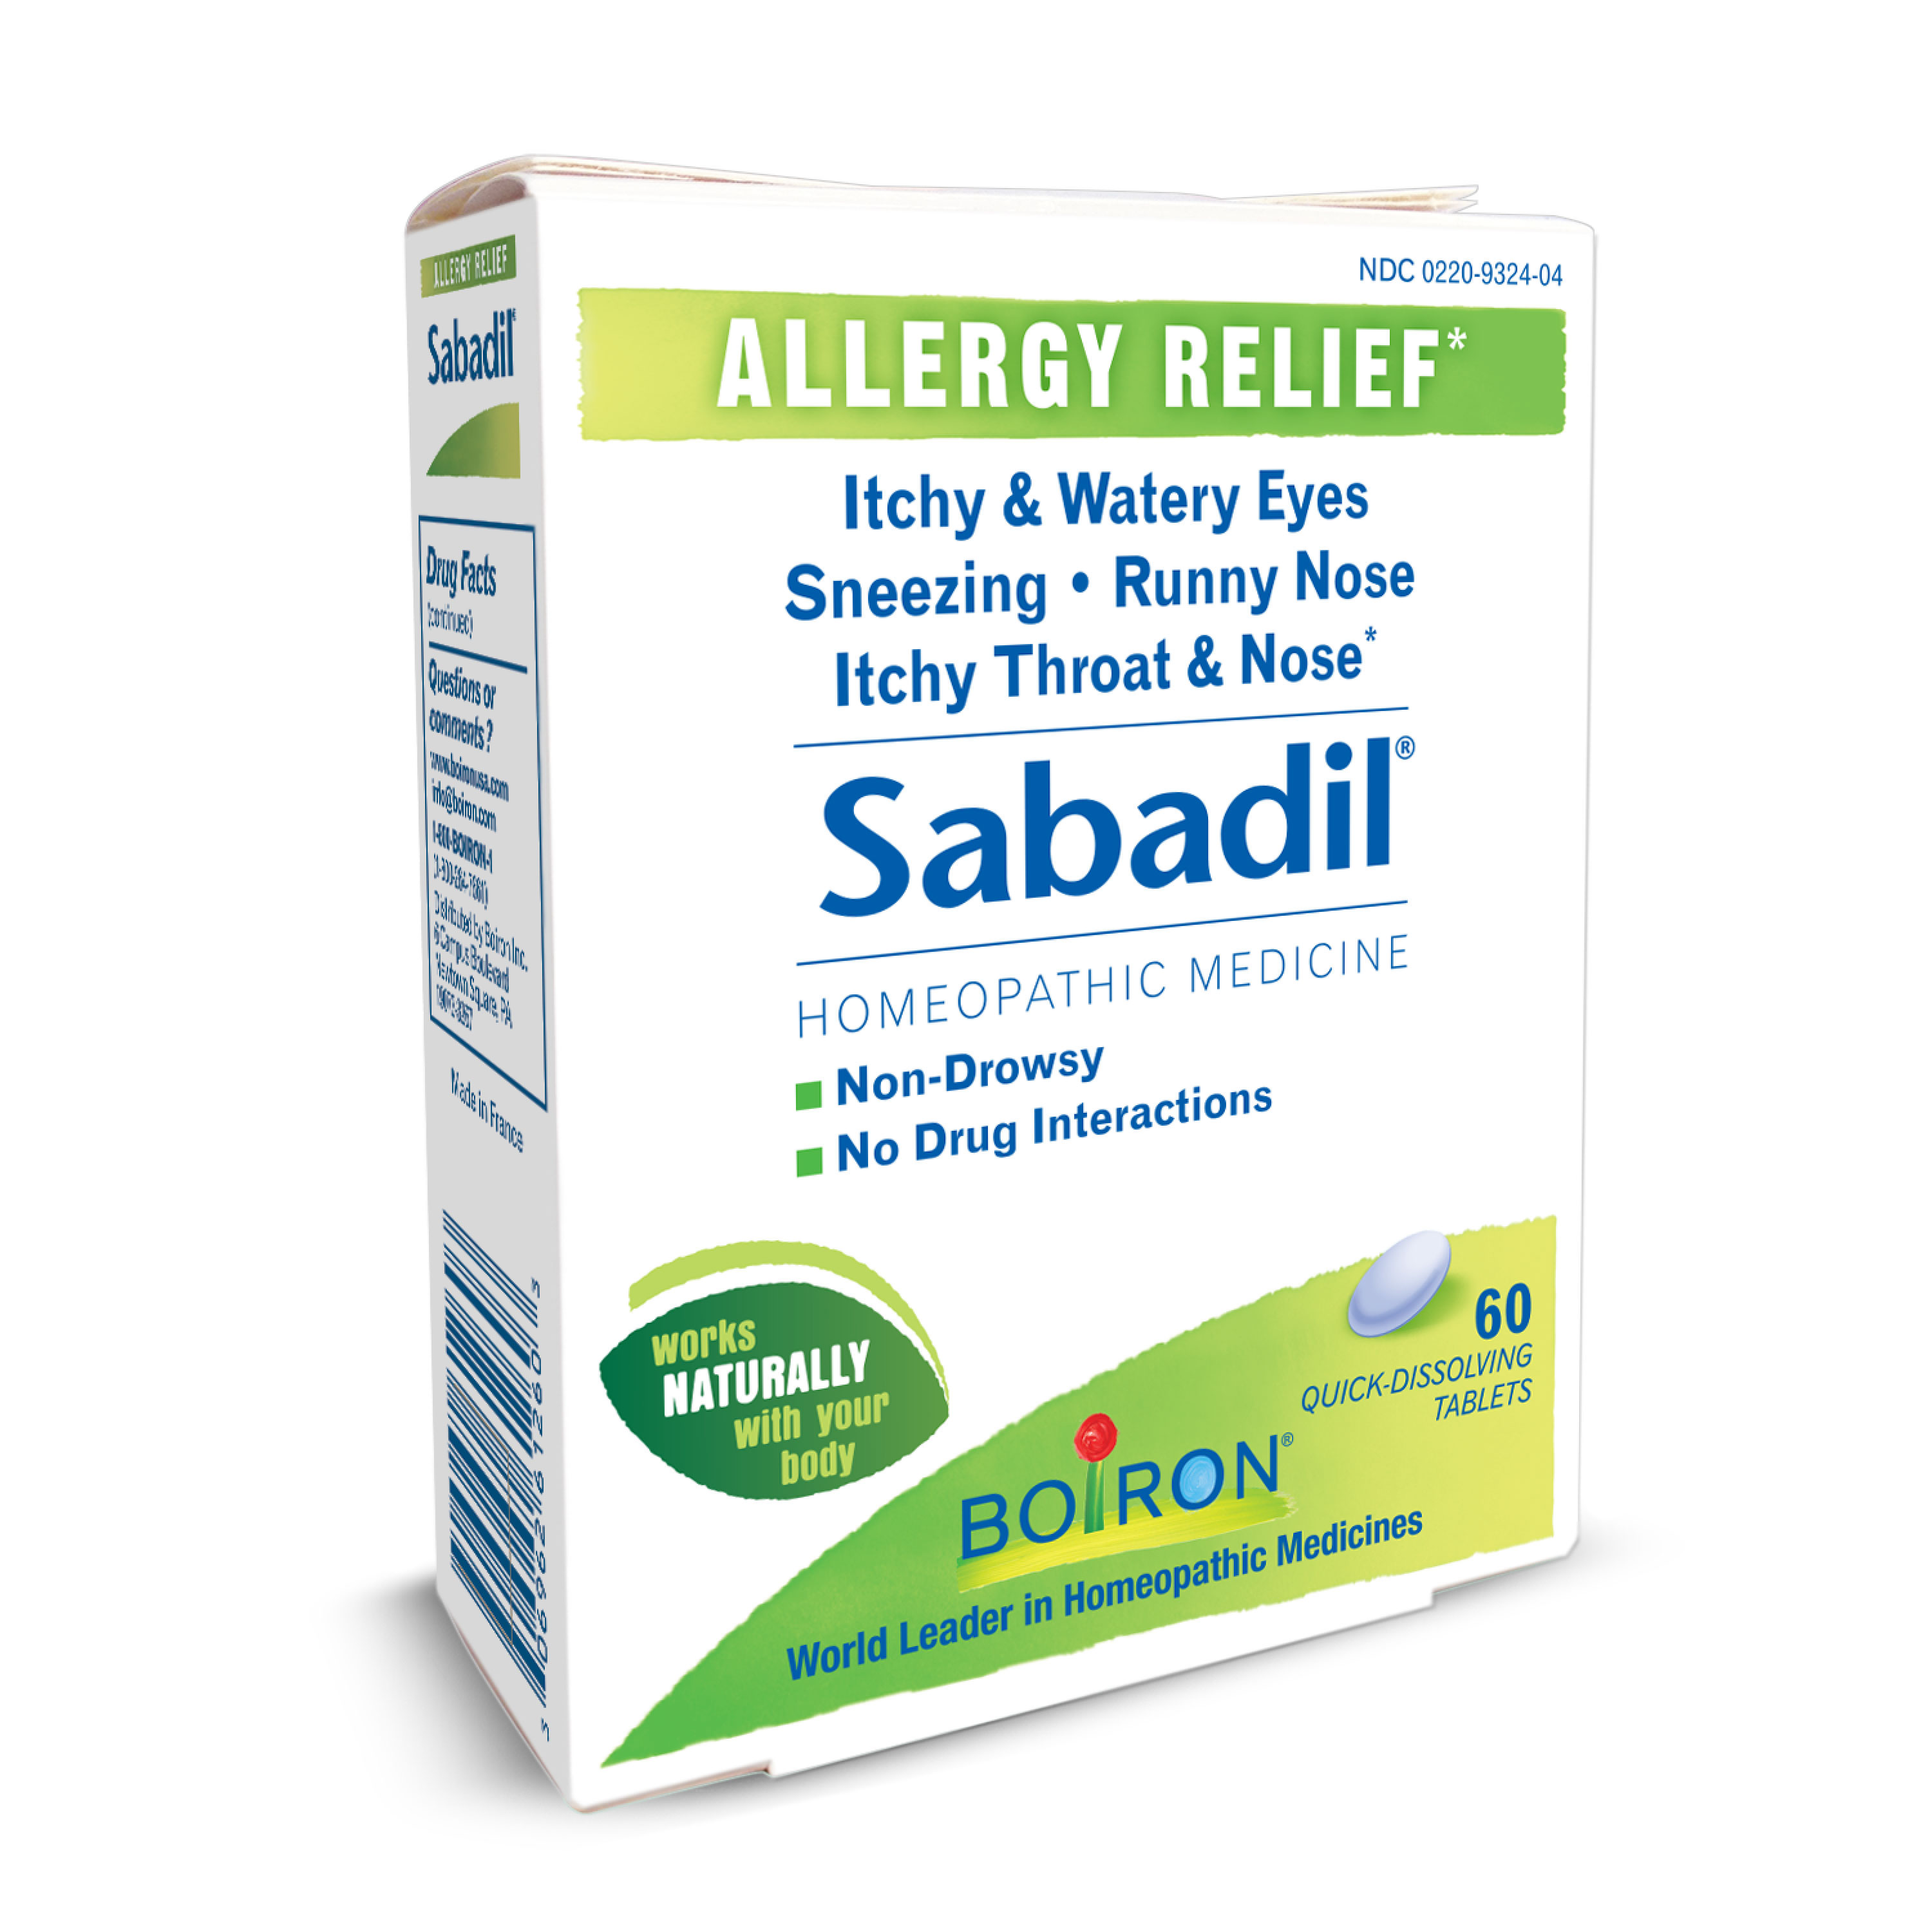 Boiron Sabadil Allergy Relief Tablets, 60 Ct - image 2 of 3